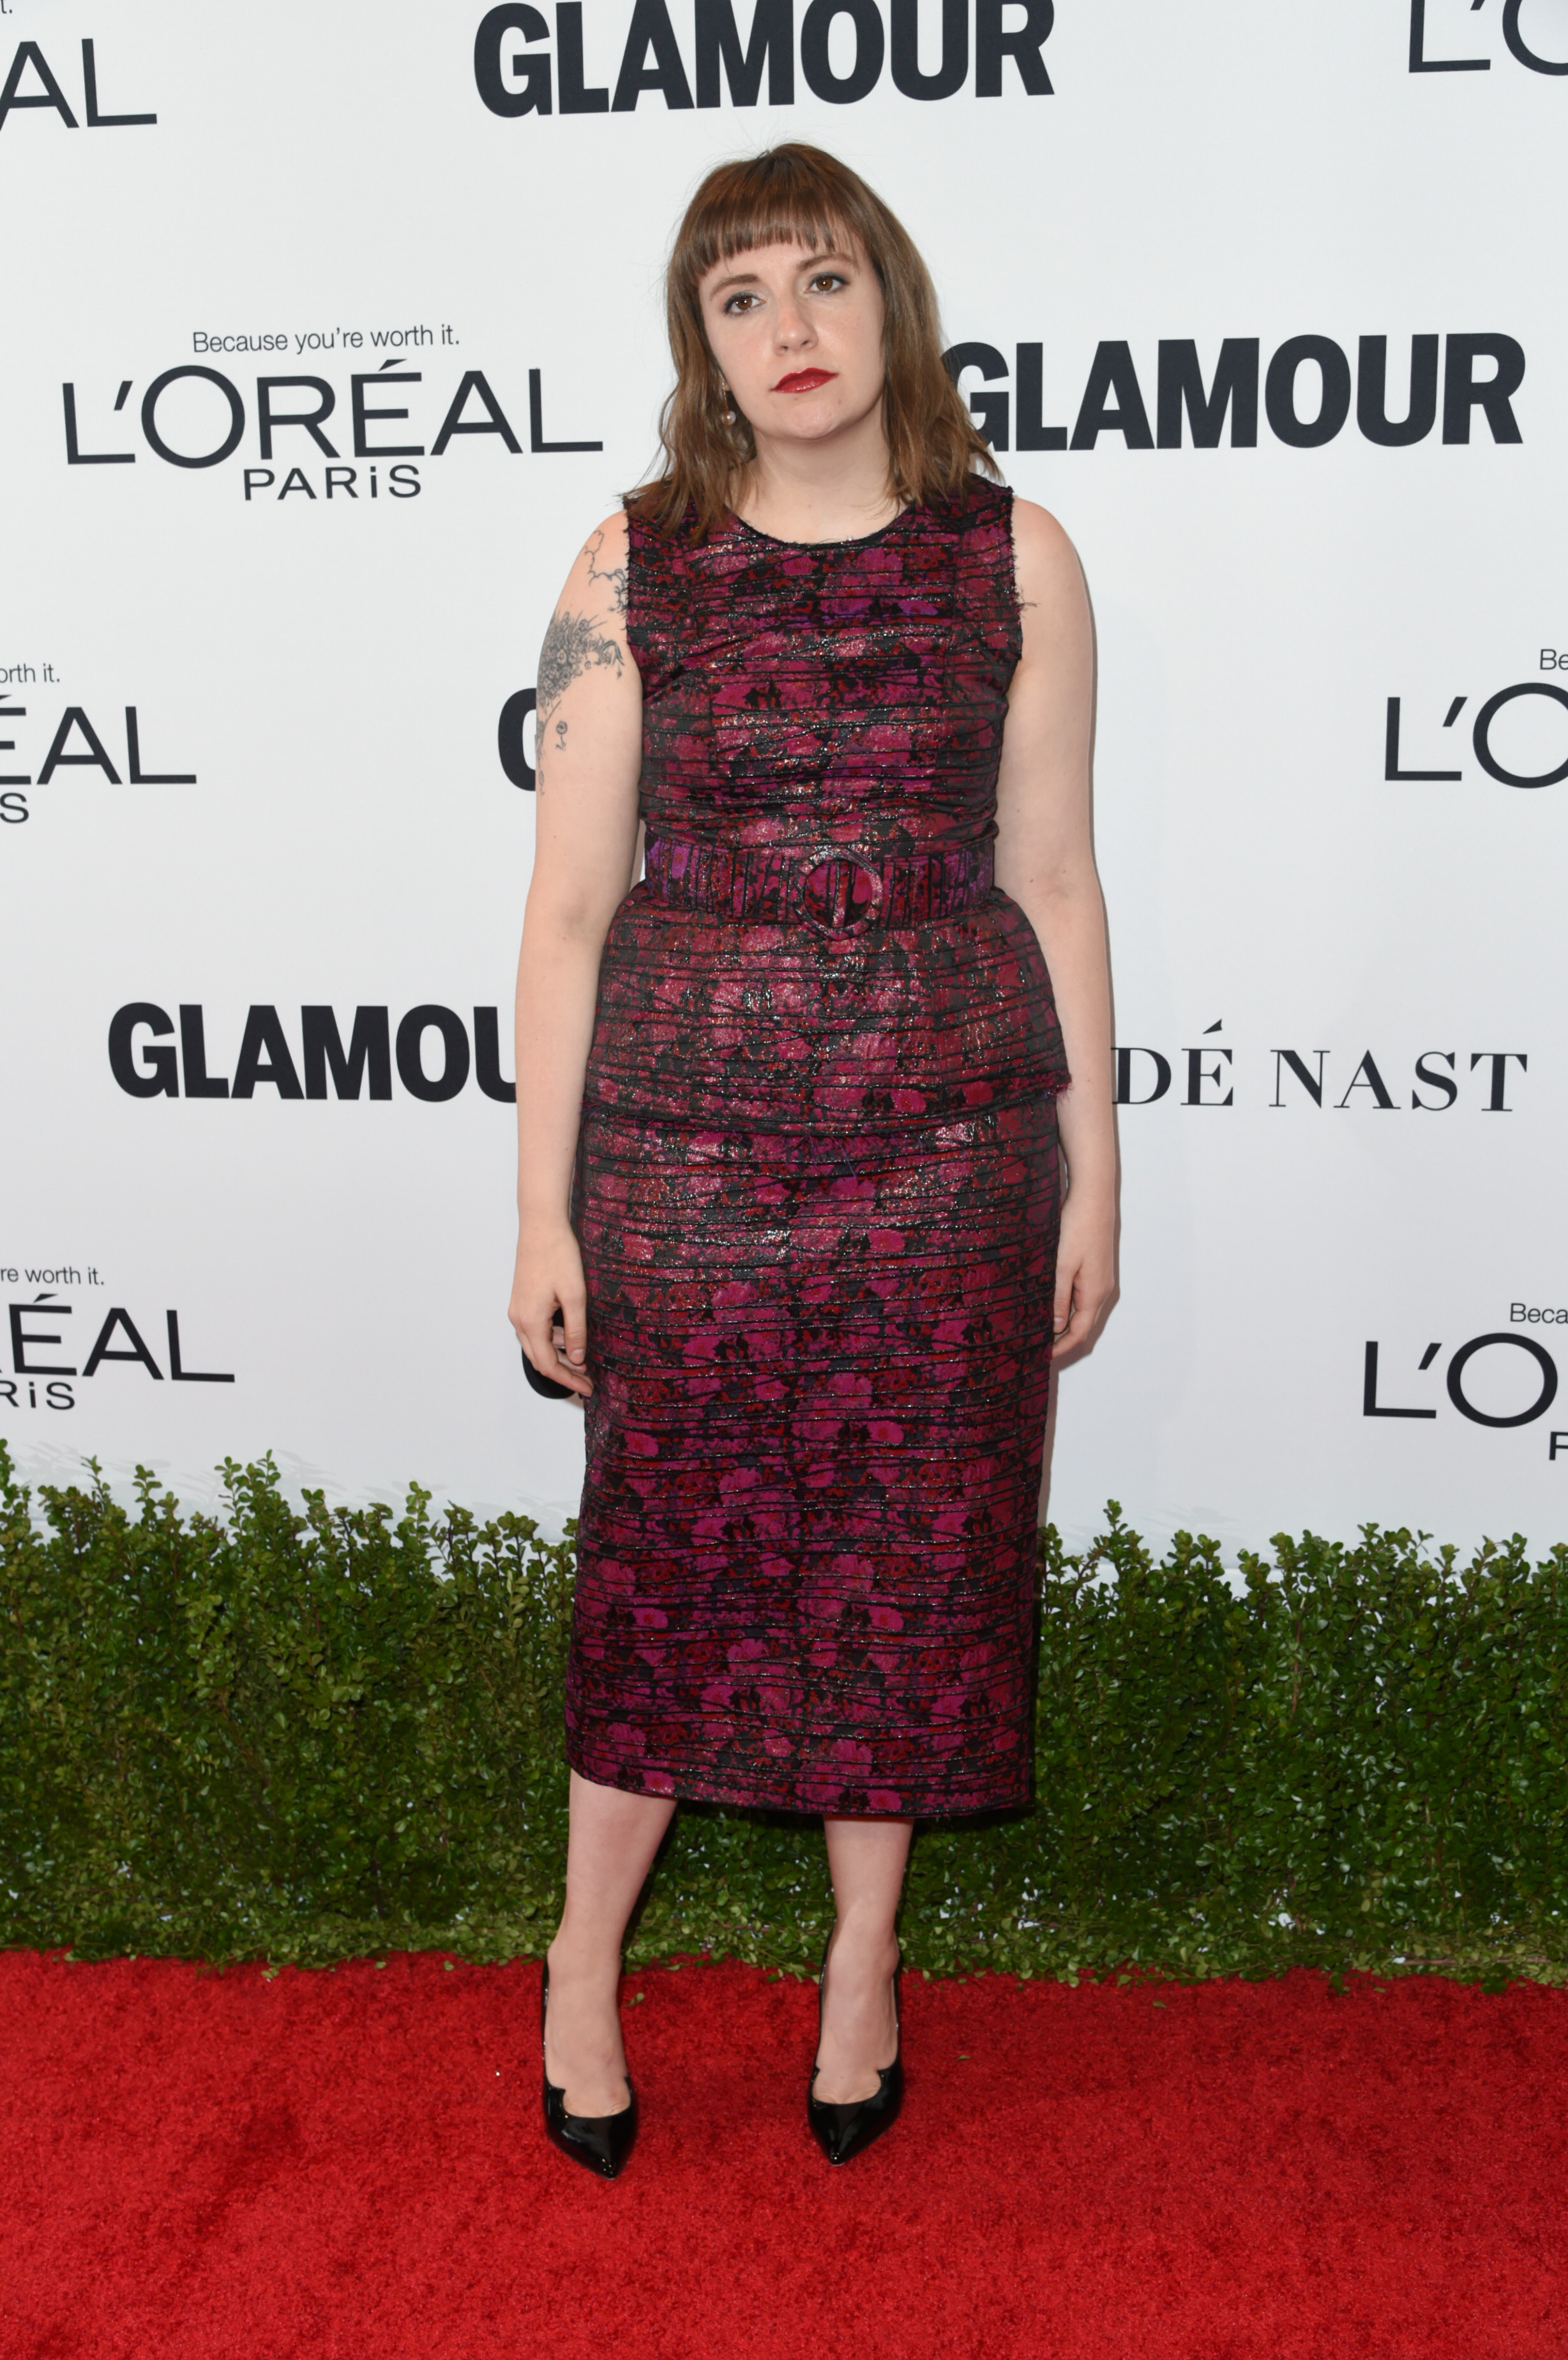 Lena Dunham at the Glamour Women of the Year party. Photo by Richard Shotwell/REX/Shutterstock 